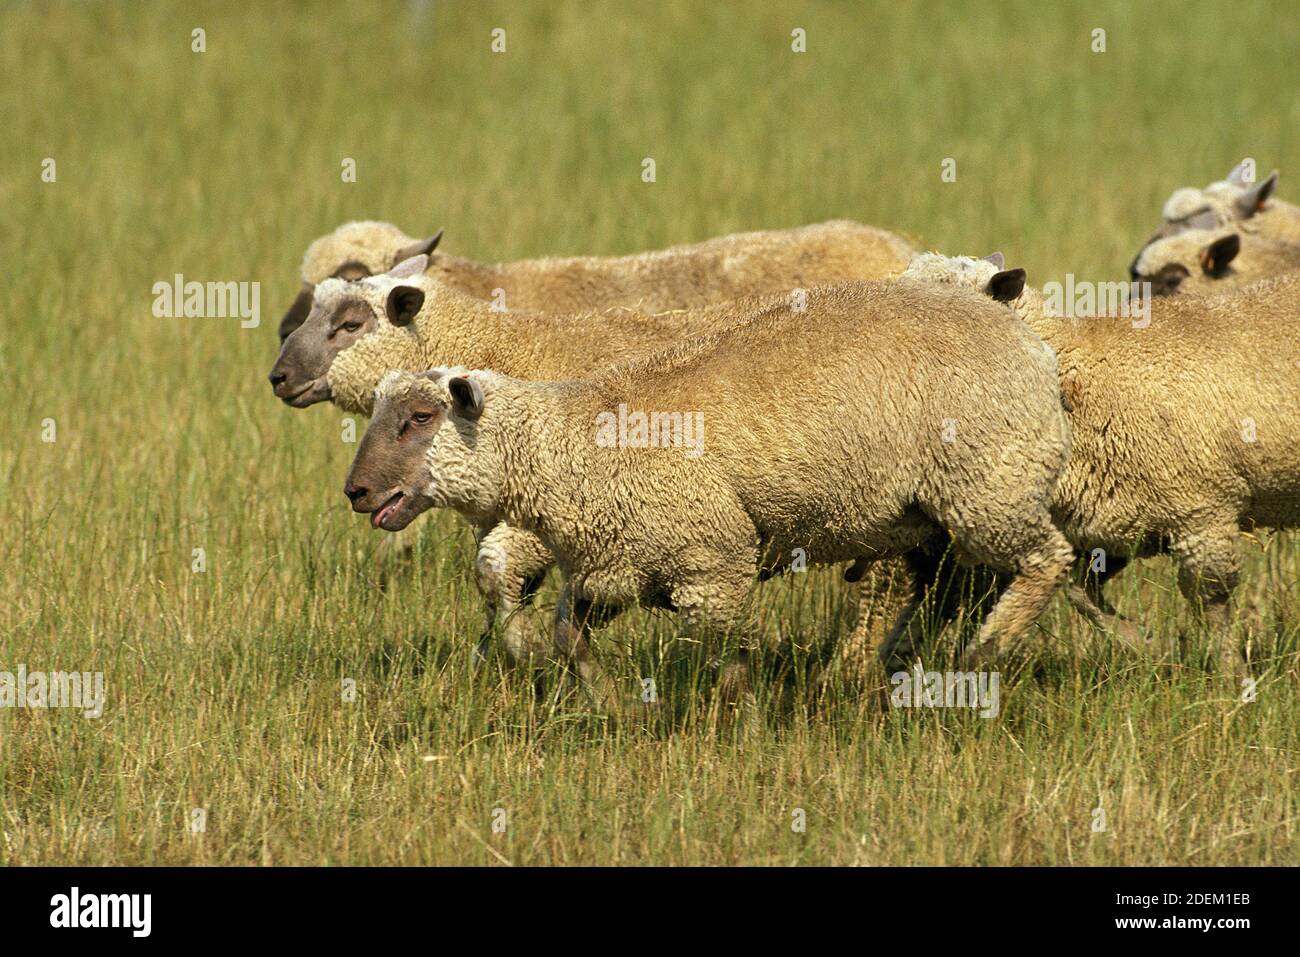 Vendeen Sheep High Resolution Stock Photography and Images - Alamy